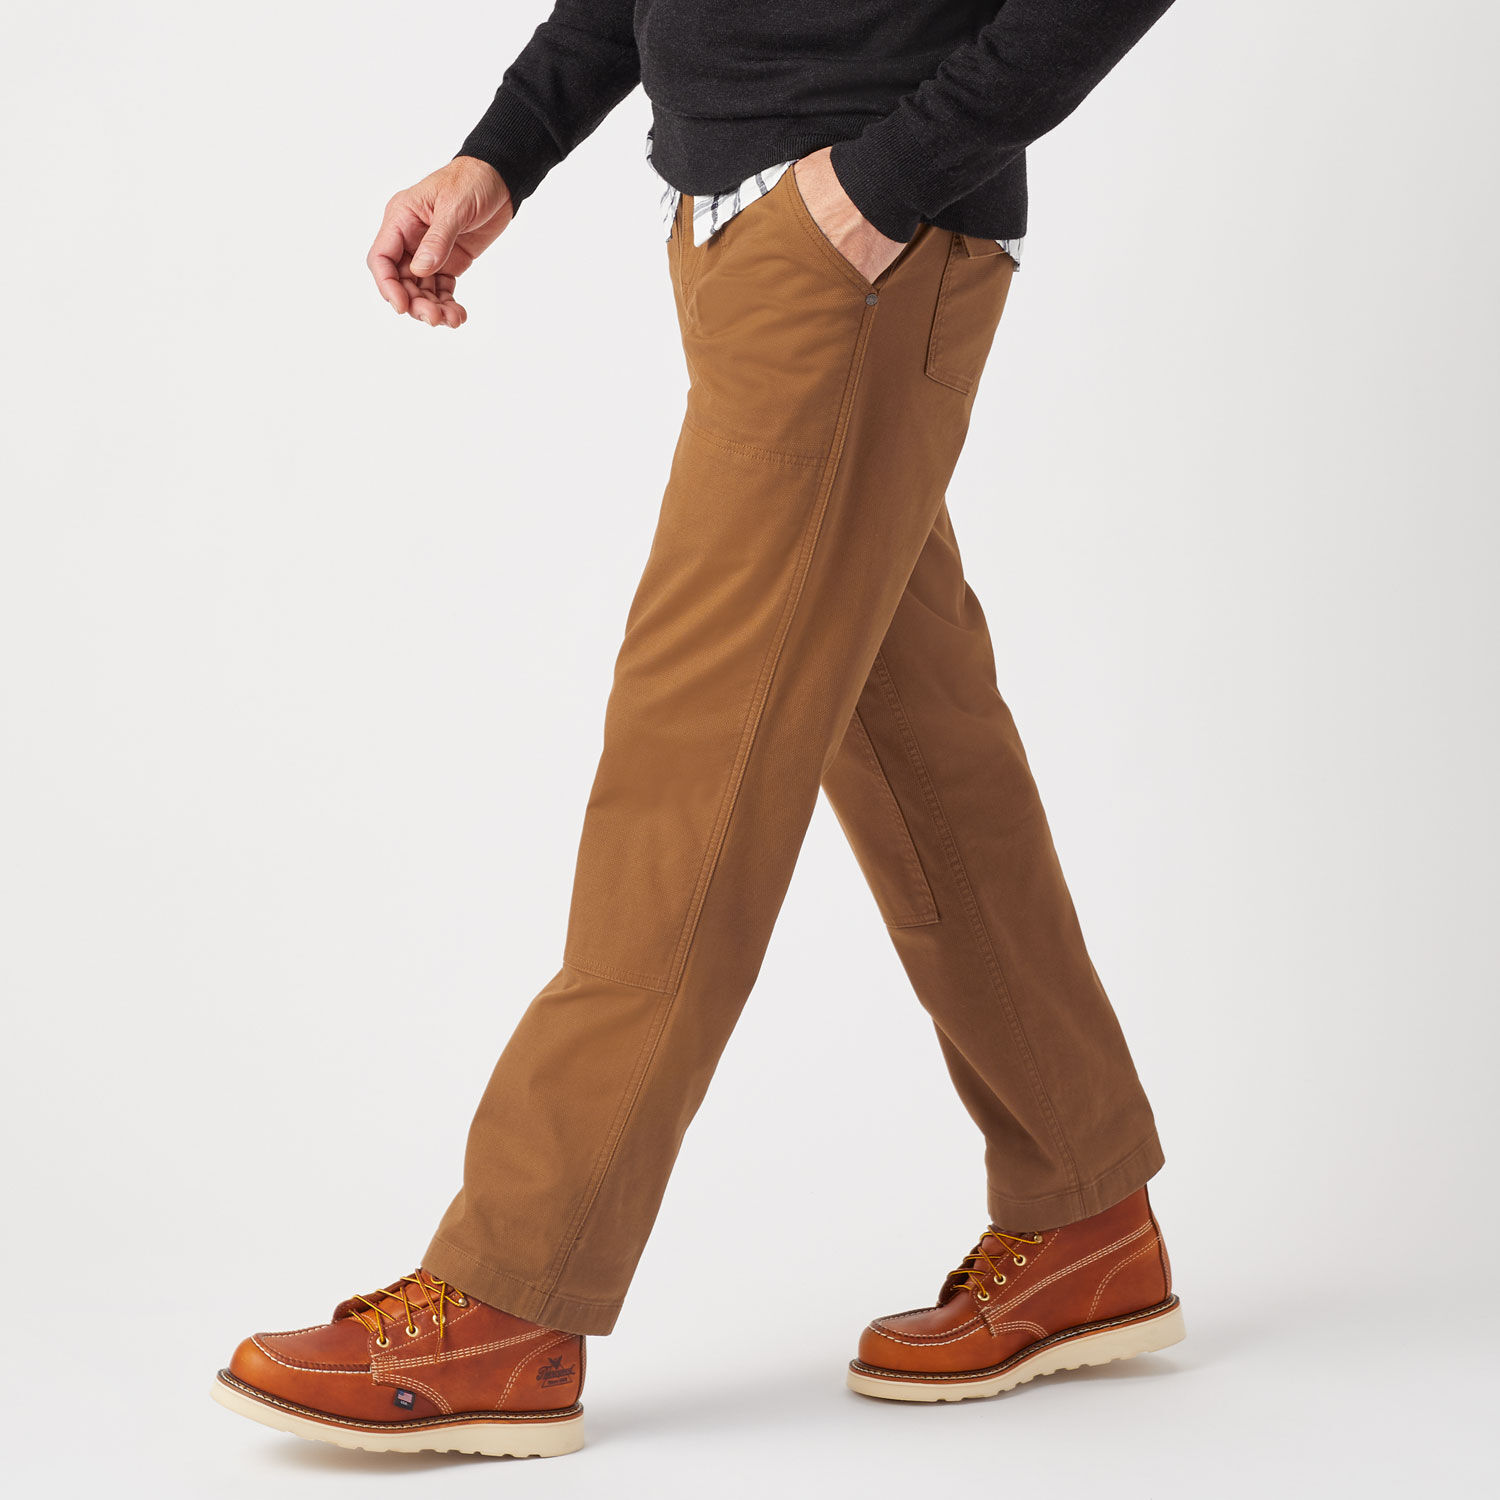 The 1620 Shop Pant | 4-Way Stretch Work Pant | Made in the U.S.A. - 1620  Workwear, Inc